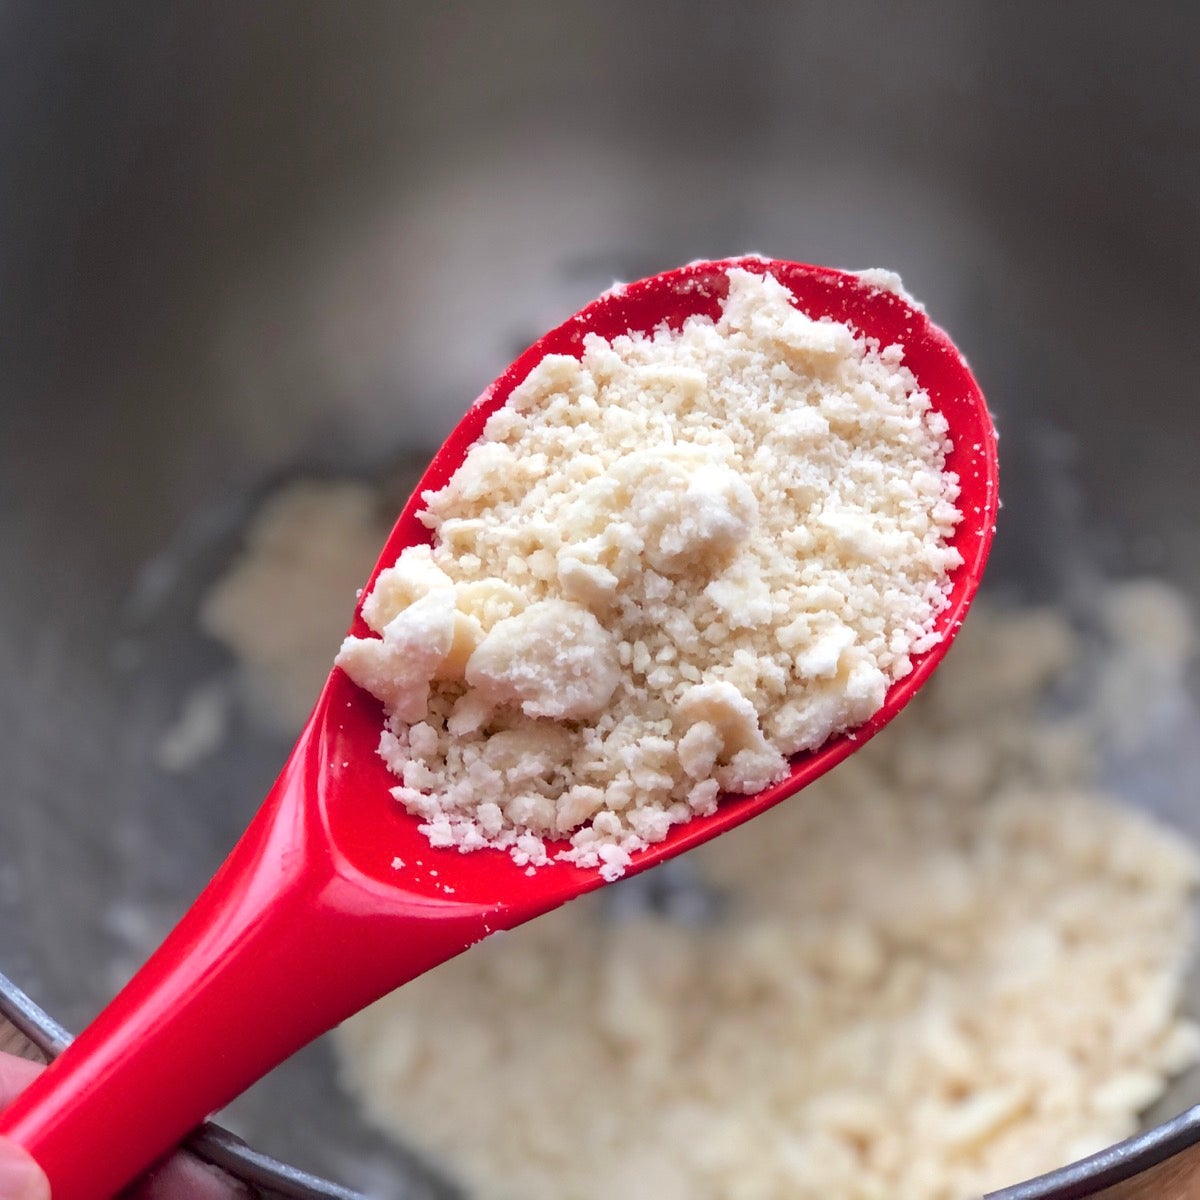 Butter and bacon fat worked into a bowl of dry ingredients to create a crumbly mixture, shown pictured in the bowl of a red spoon.